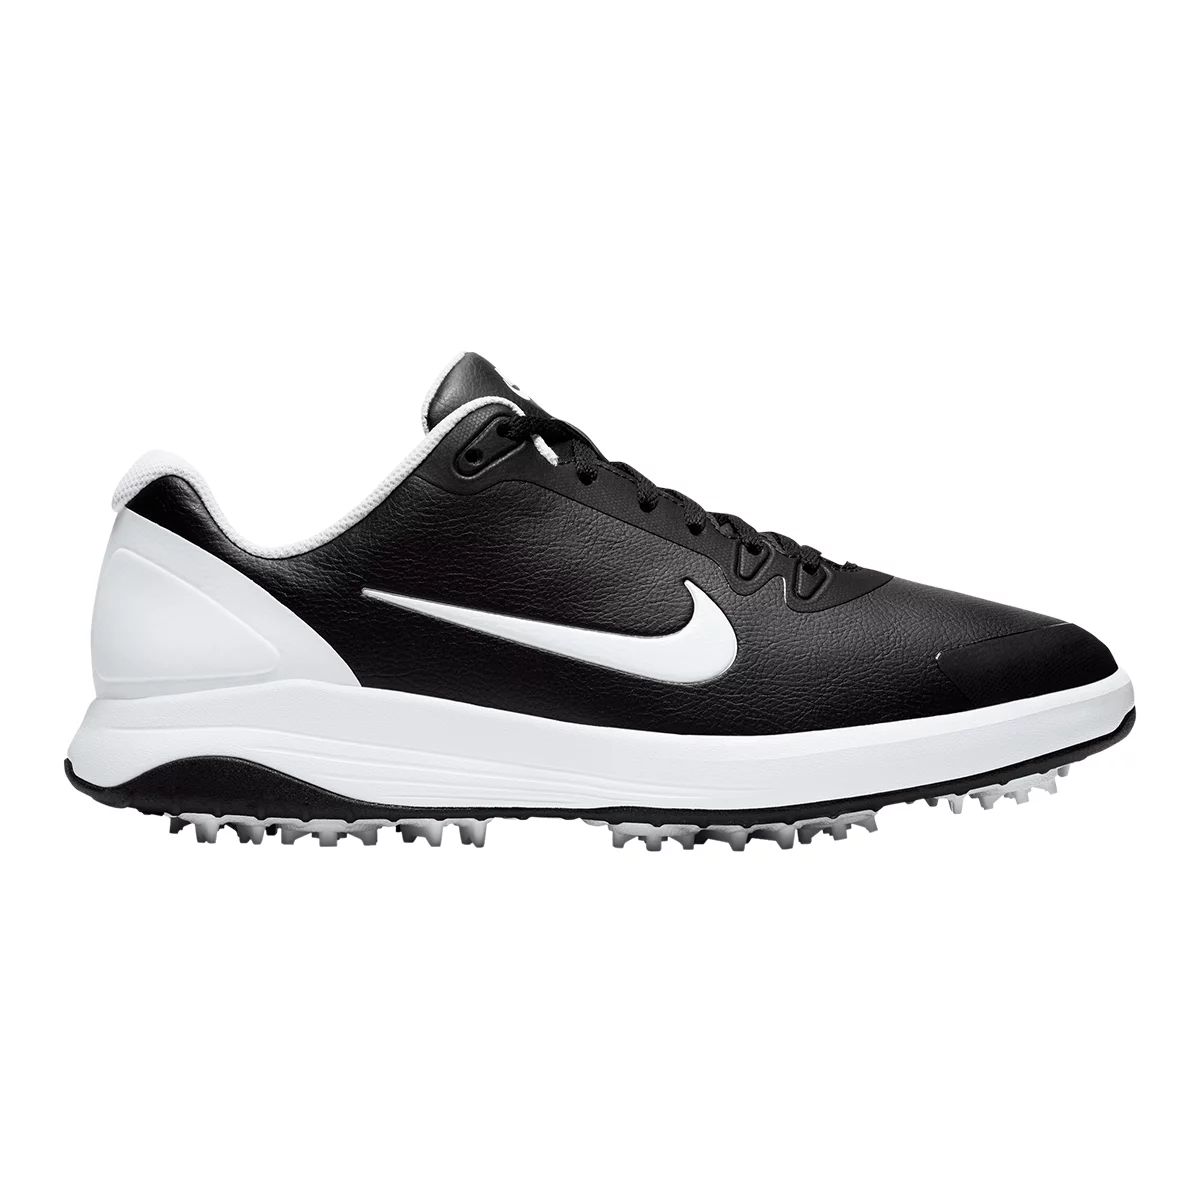 Nike Men's Infinity G Golf Shoes, Spiked, Synthetic Leather, Waterproof ...